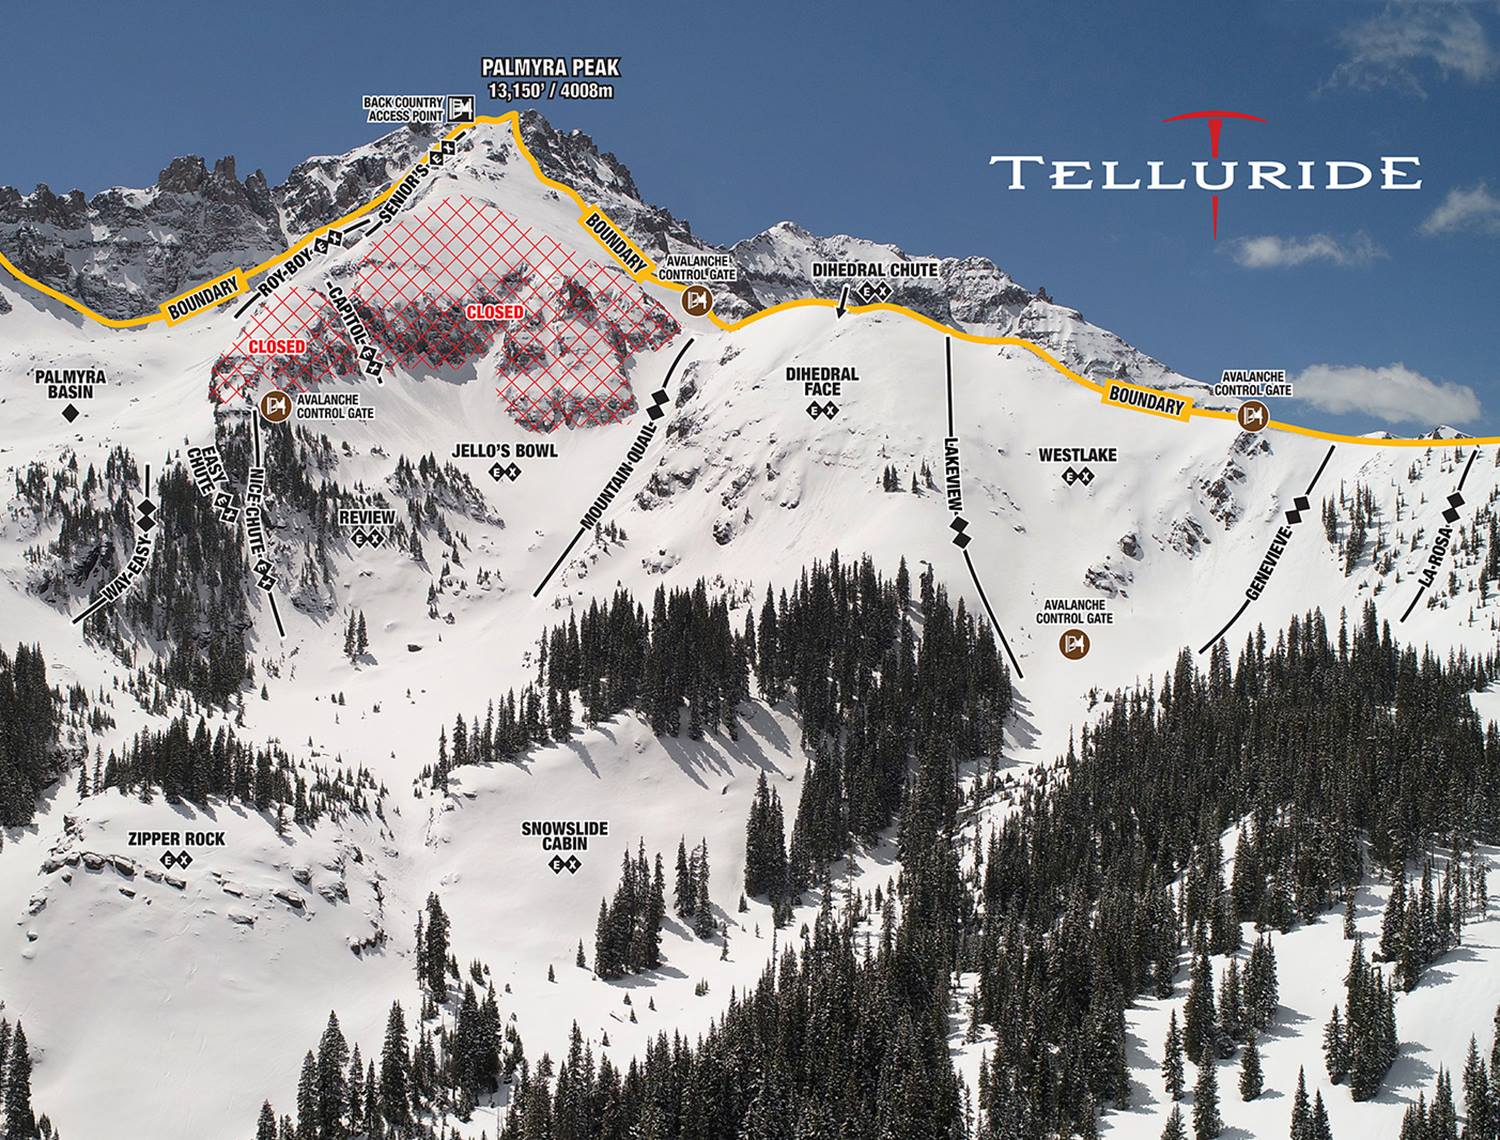 Check Out These Rad OffPiste Maps For Telluride! Unofficial Networks